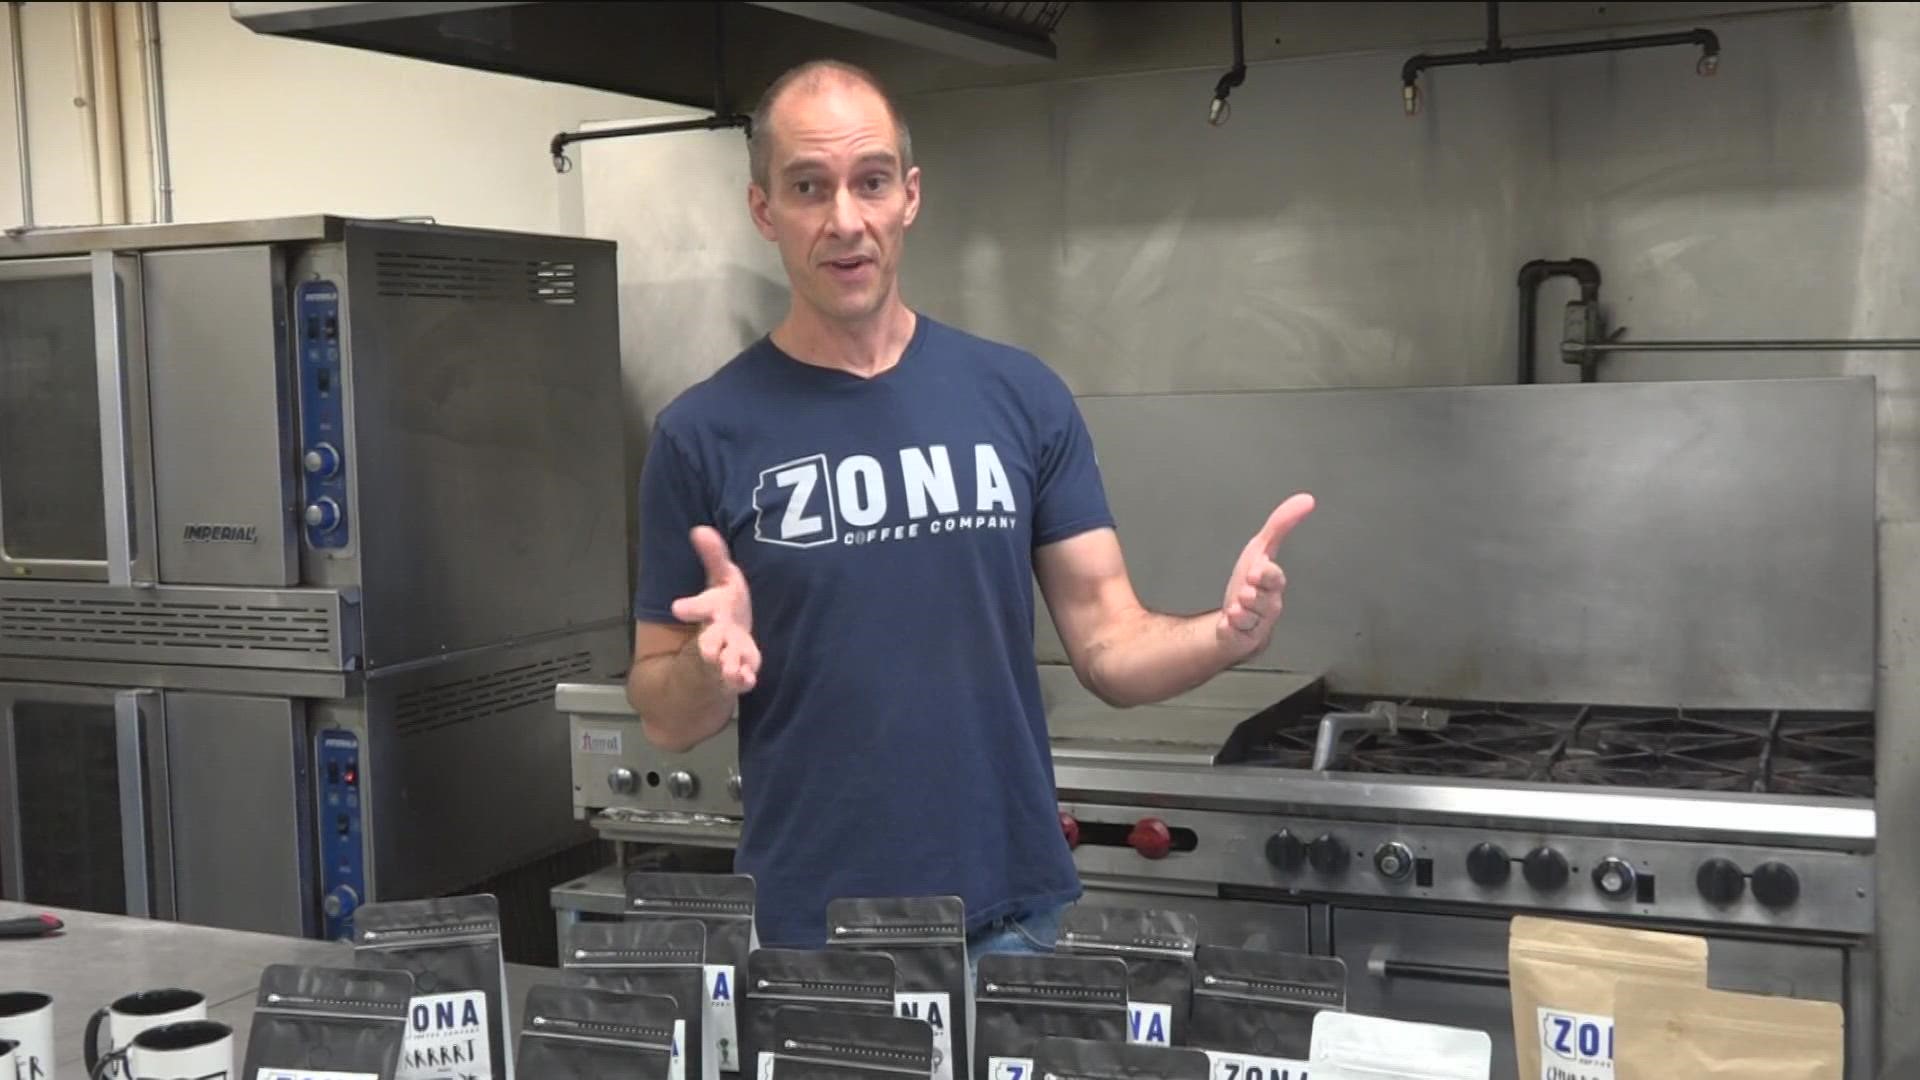 A former Phoenix police officer has decided to step away from law enforcement and start a new career by launching the Zona Coffee Company.